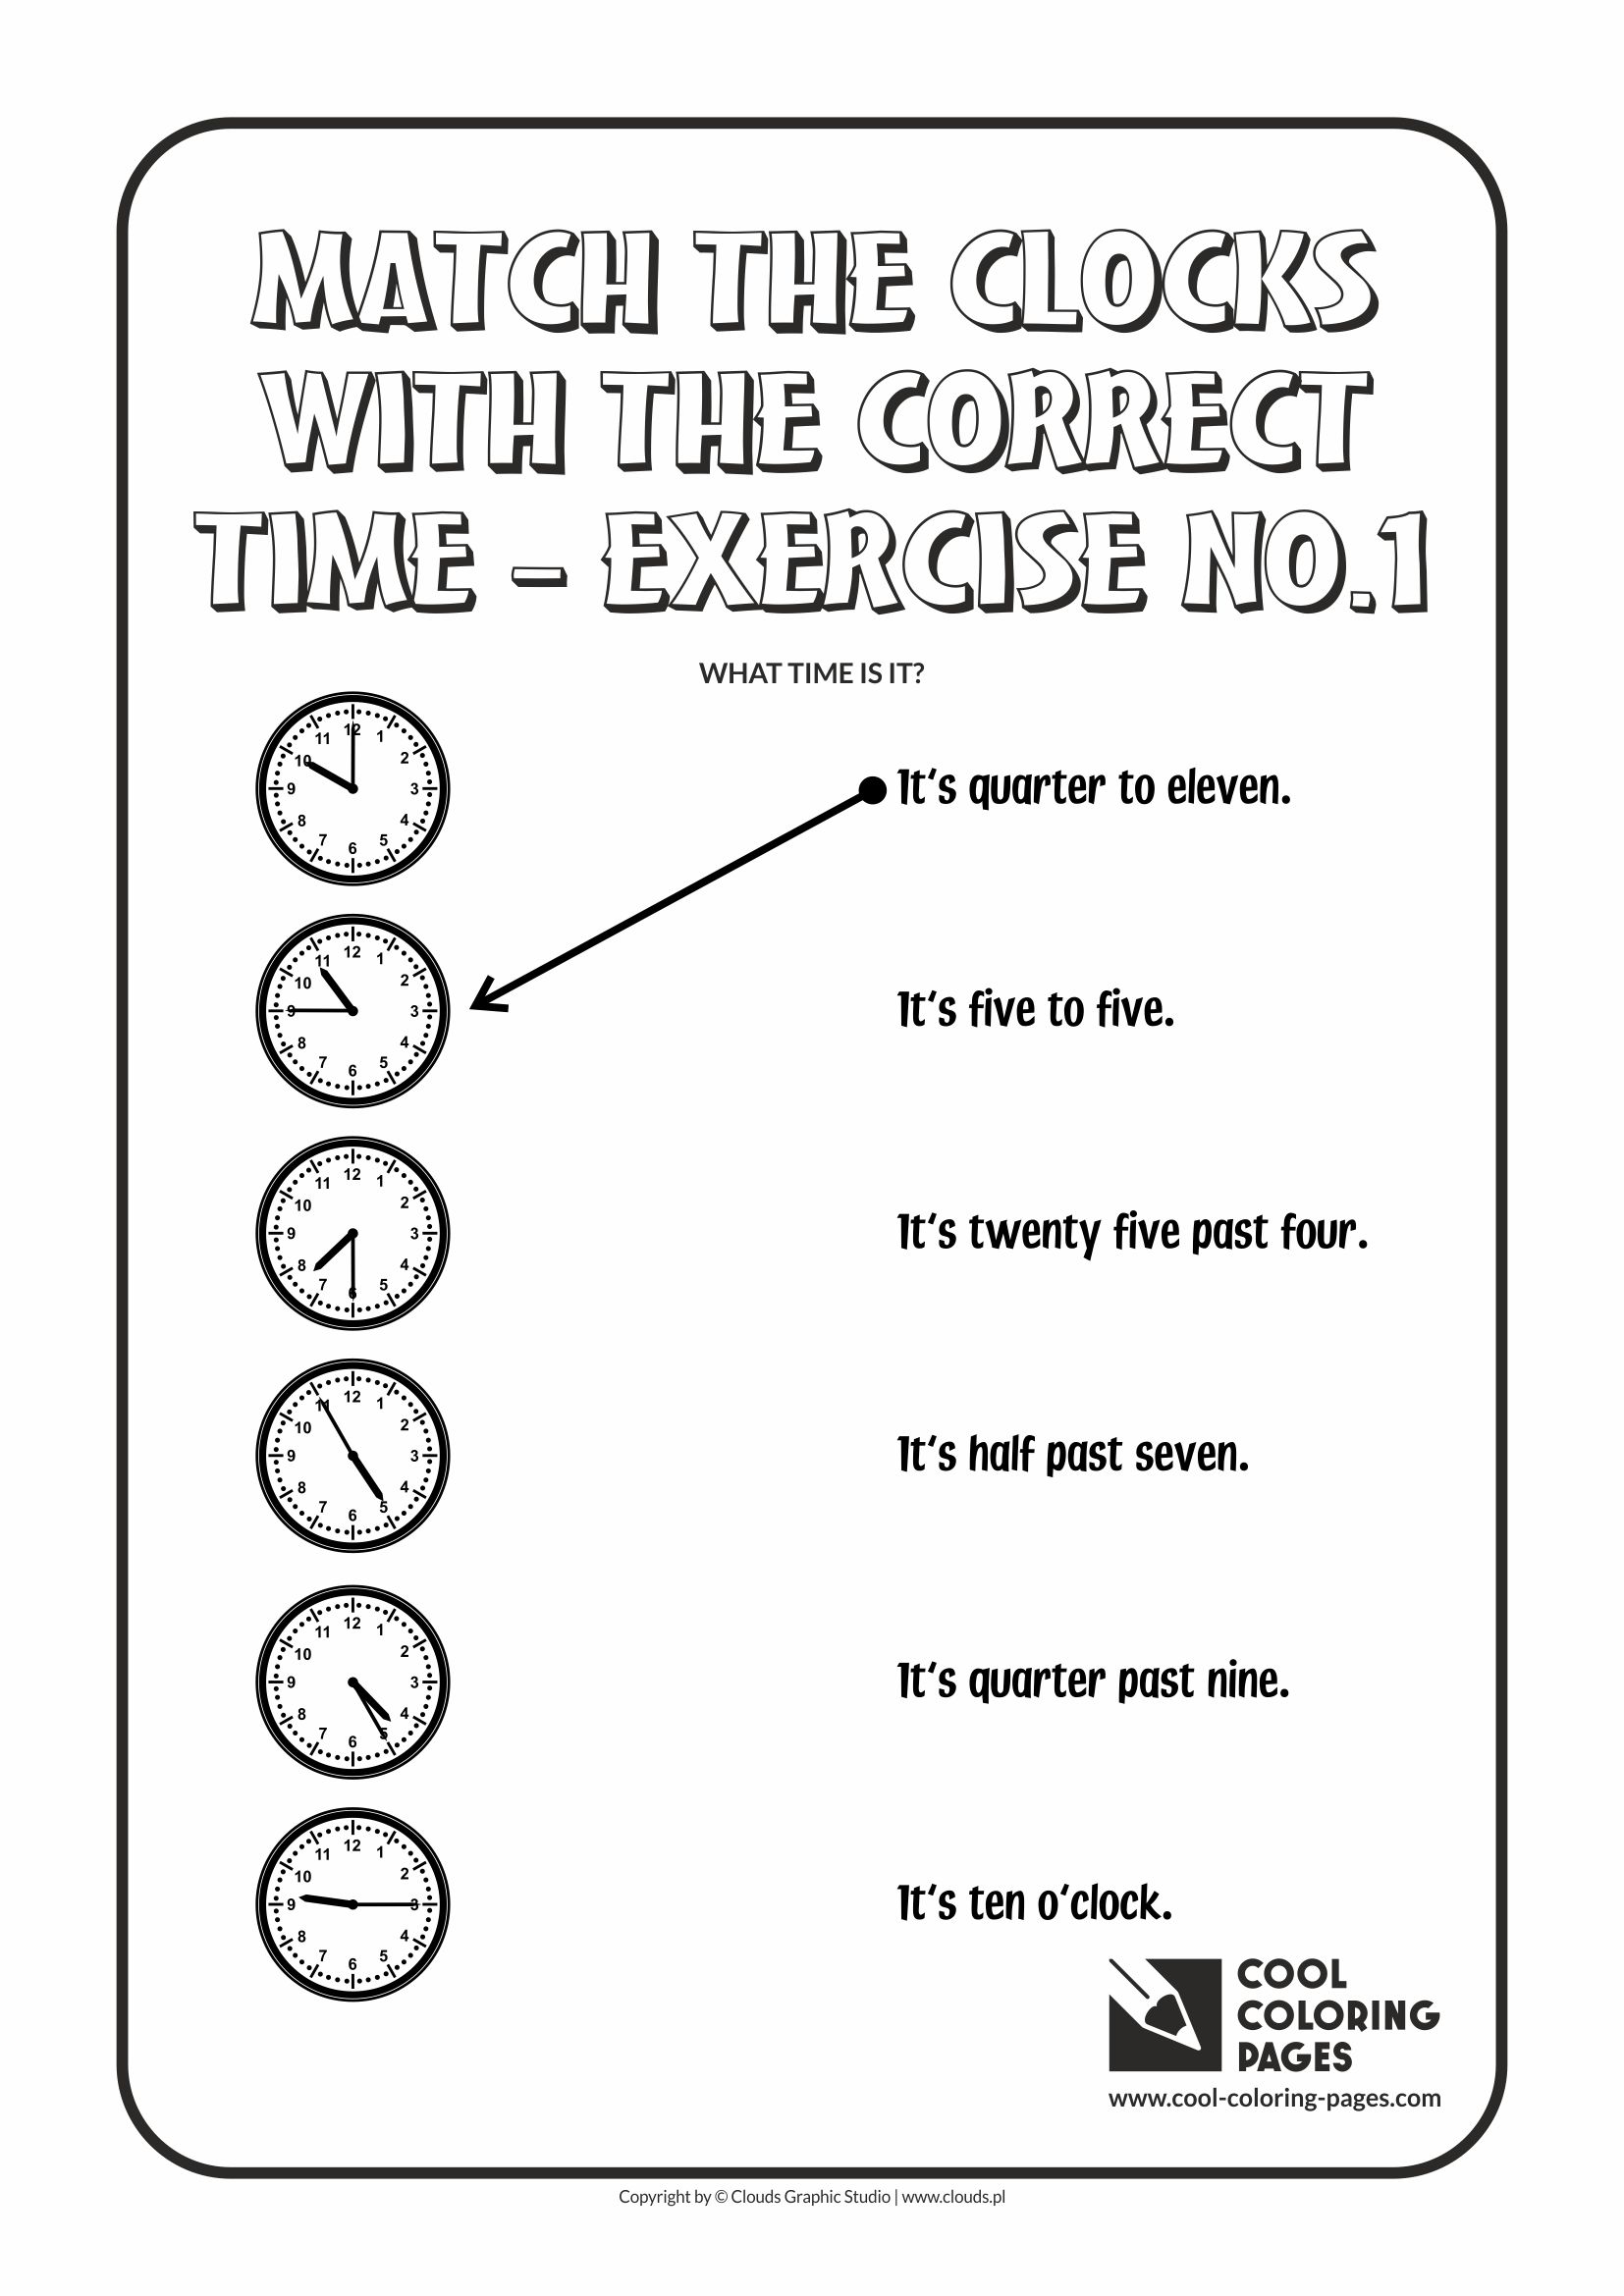 Cool Coloring Pages - Time / Match the clocks with the correct time no.1